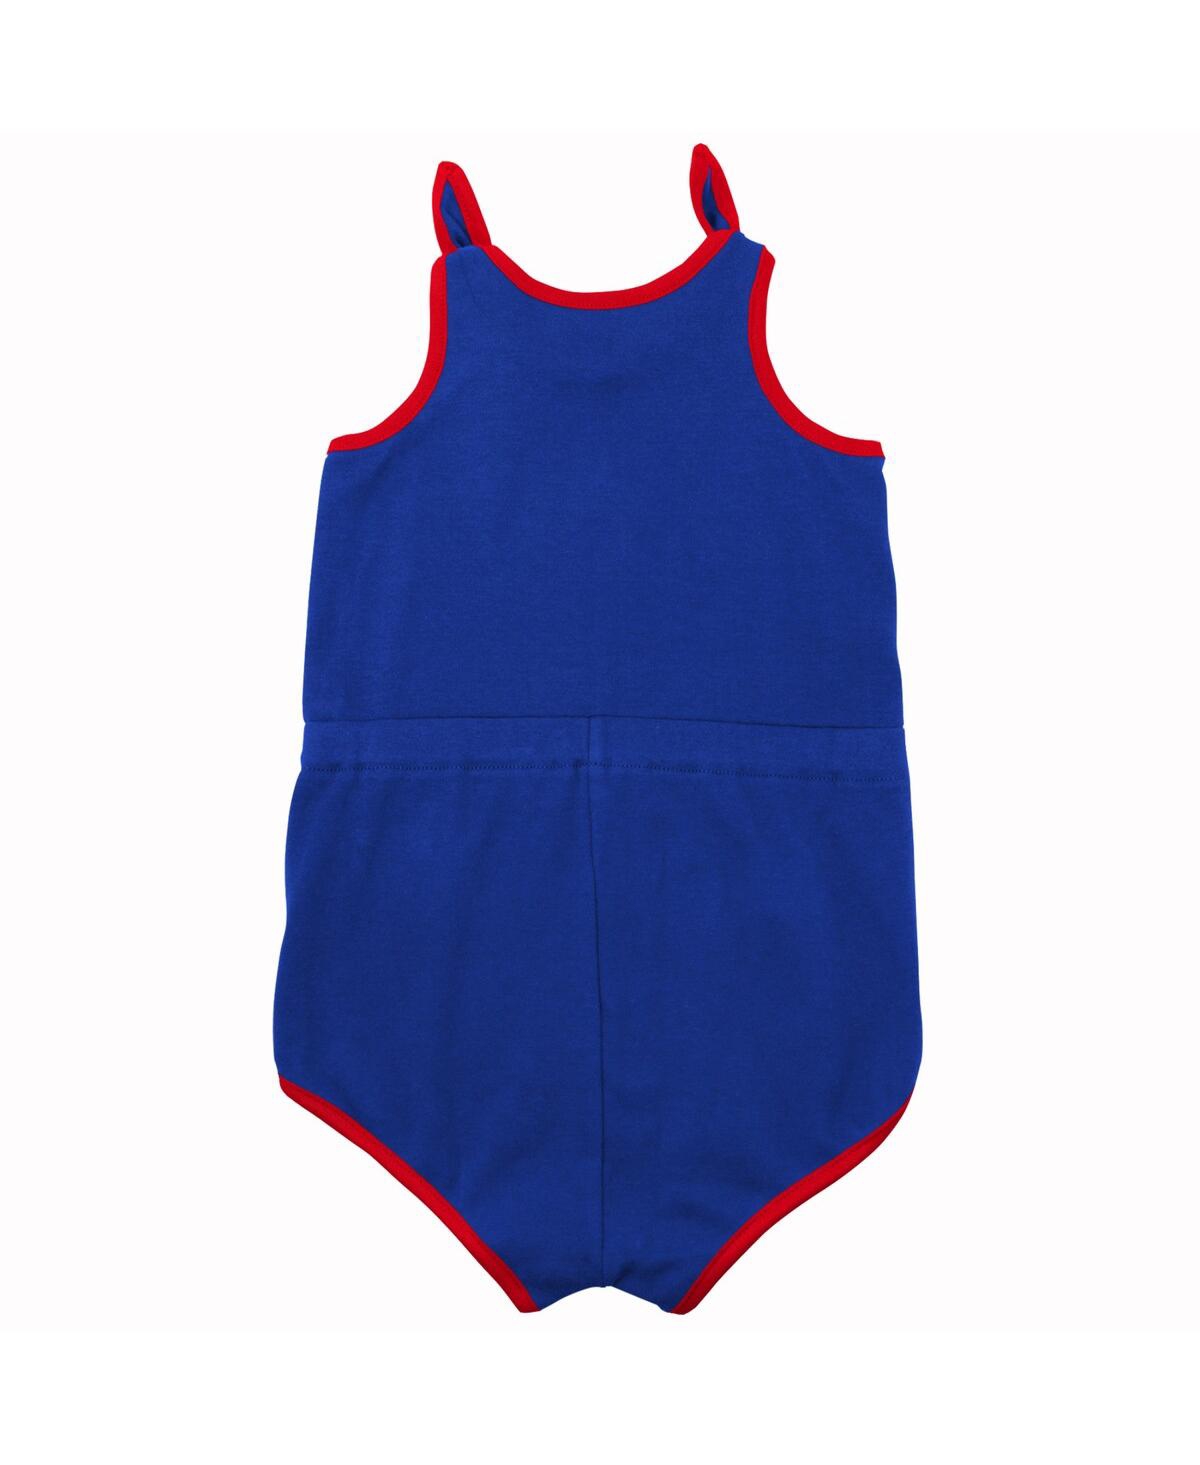 Shop Outerstuff Little Boys And Girls Royal Chicago Cubs Hit And Run Bodysuit